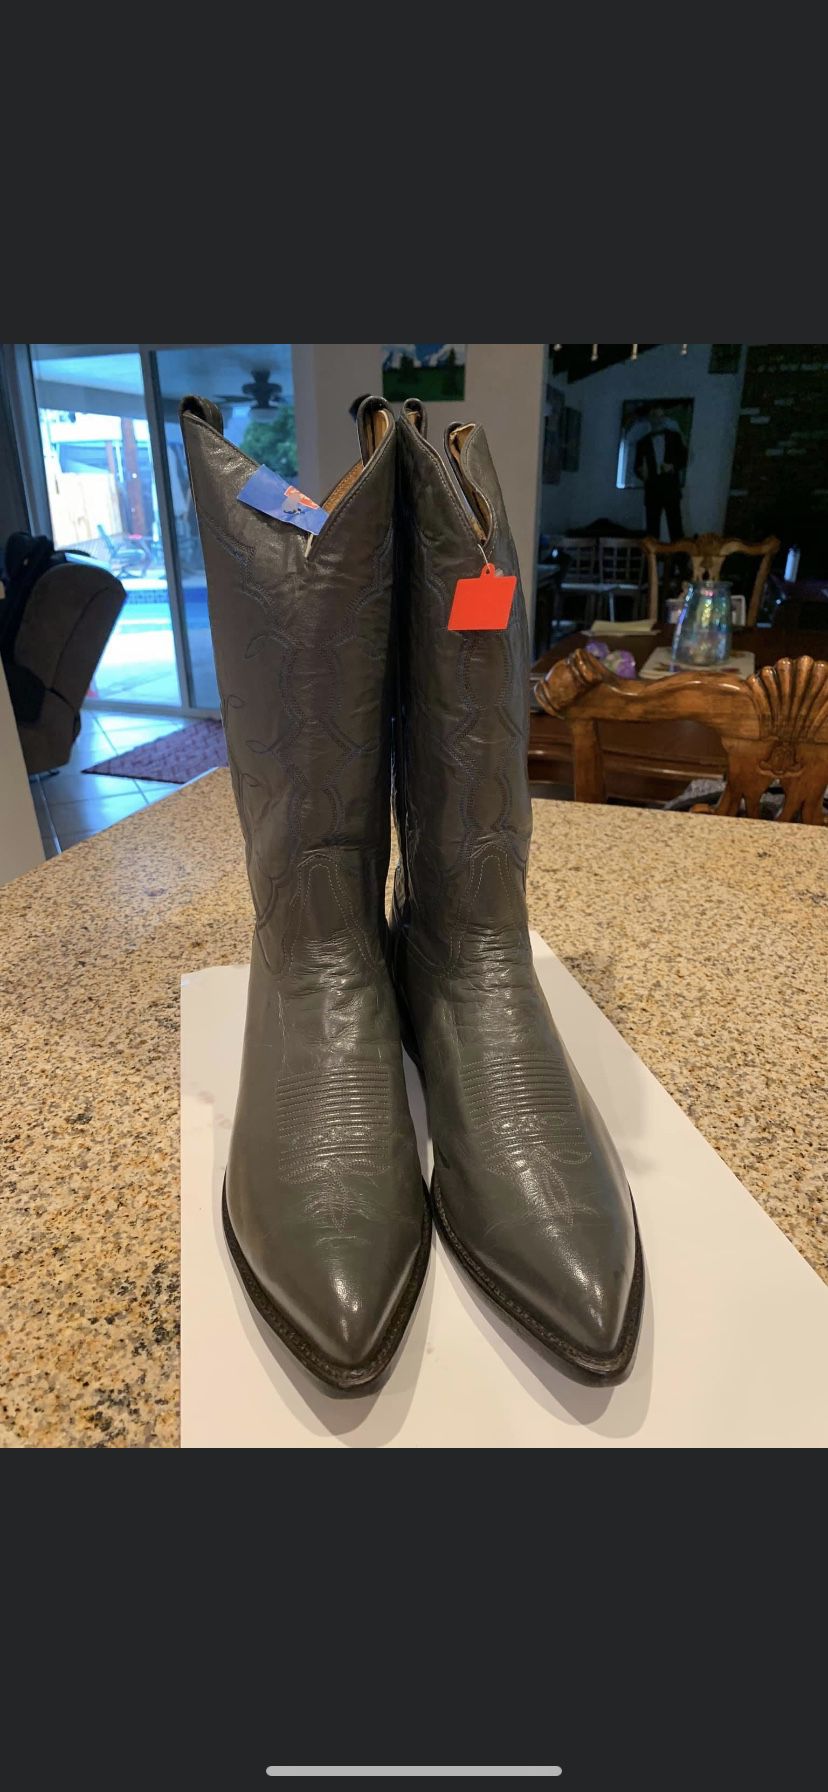 Tony Lama leather cowboy boots size 11.5d used once